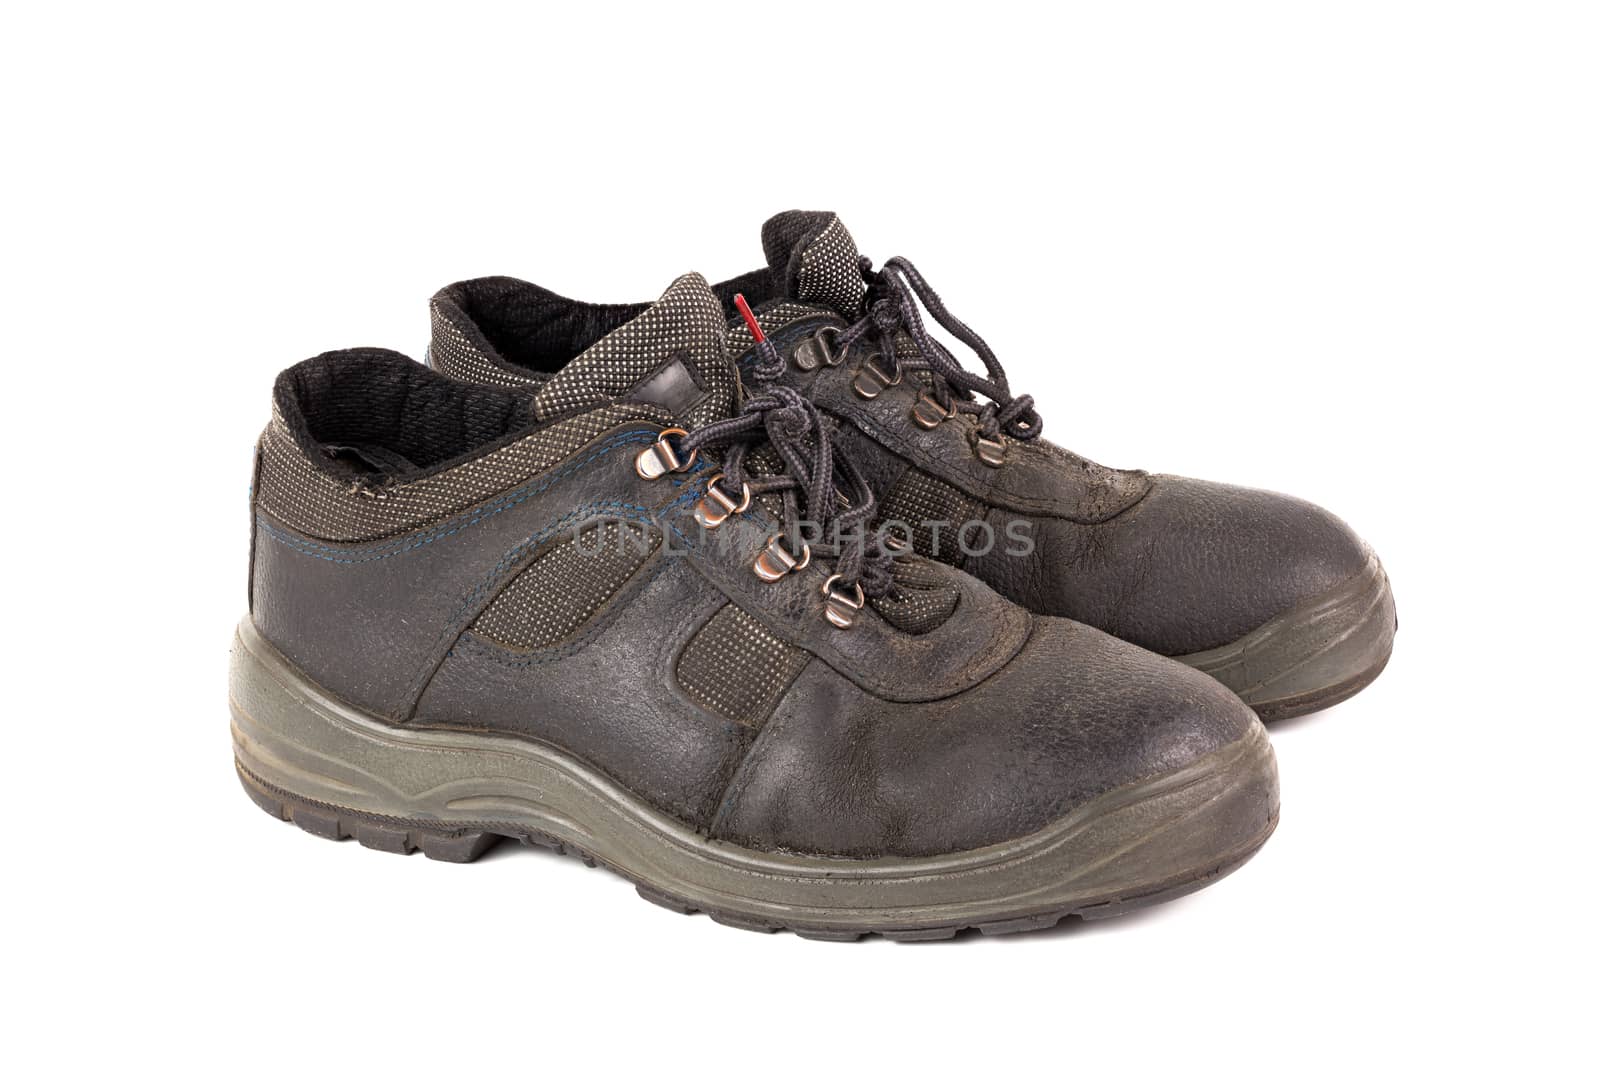 a pair of used blue leather work shoes with fabric incuts isolated on white background.